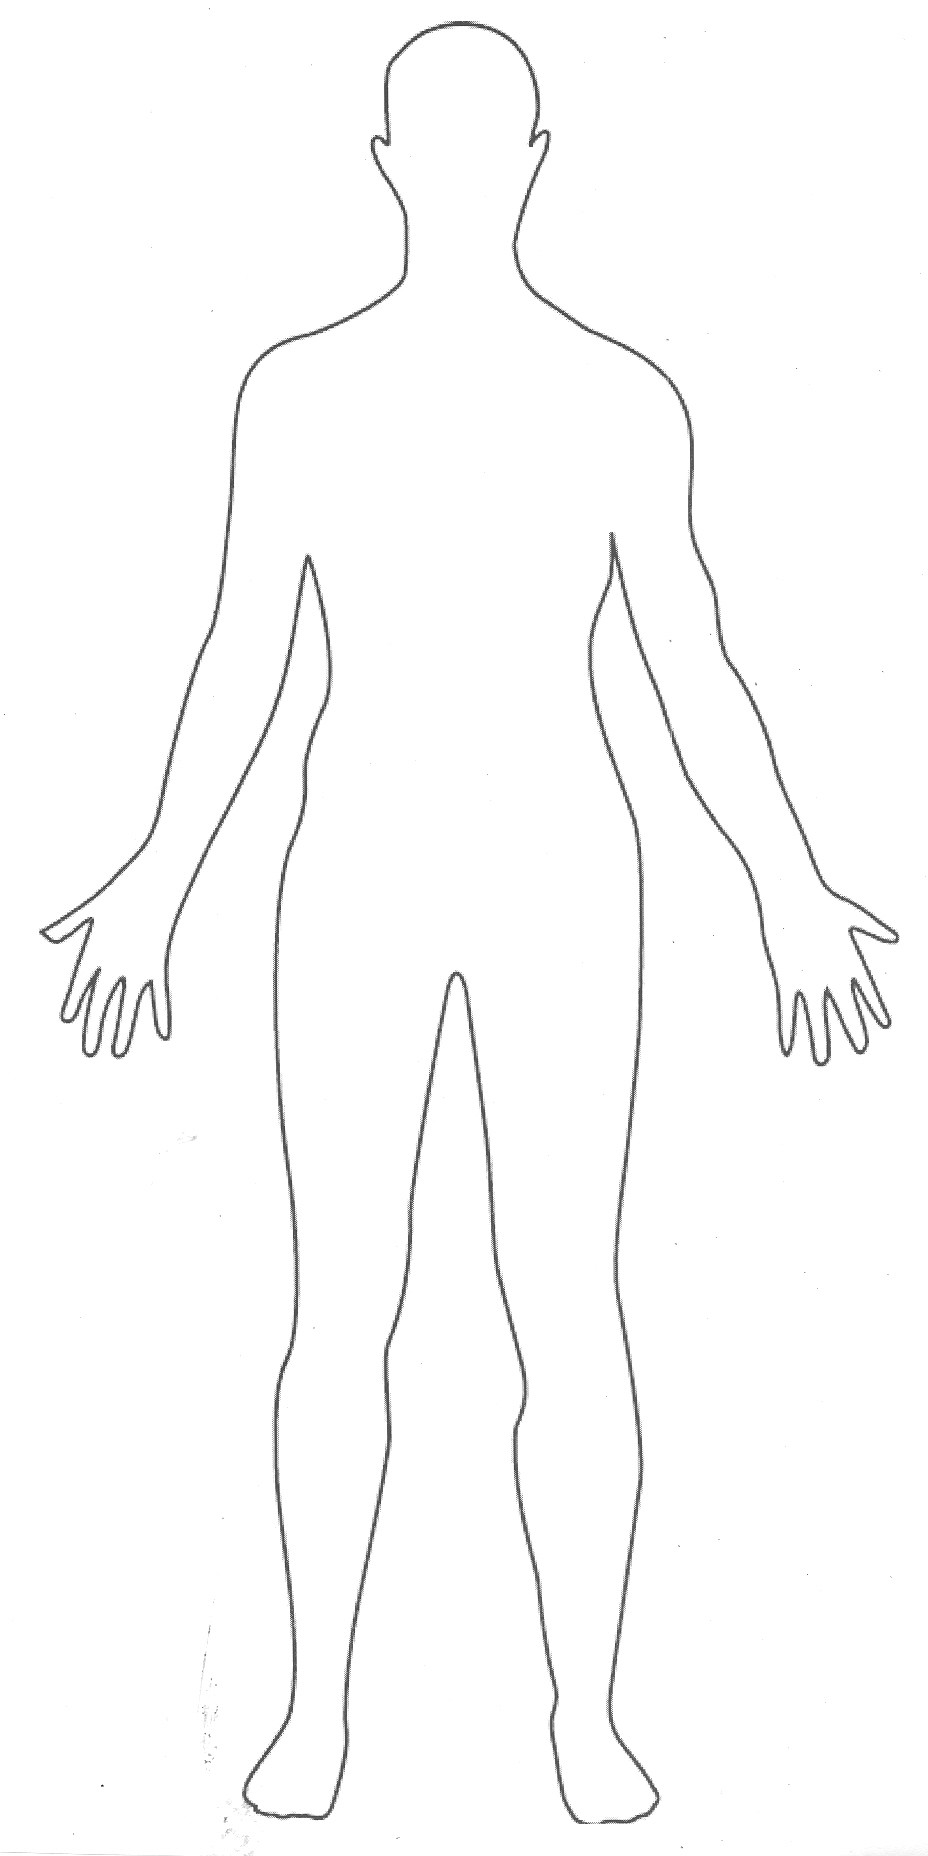 female-body-outline-clipart-clipground